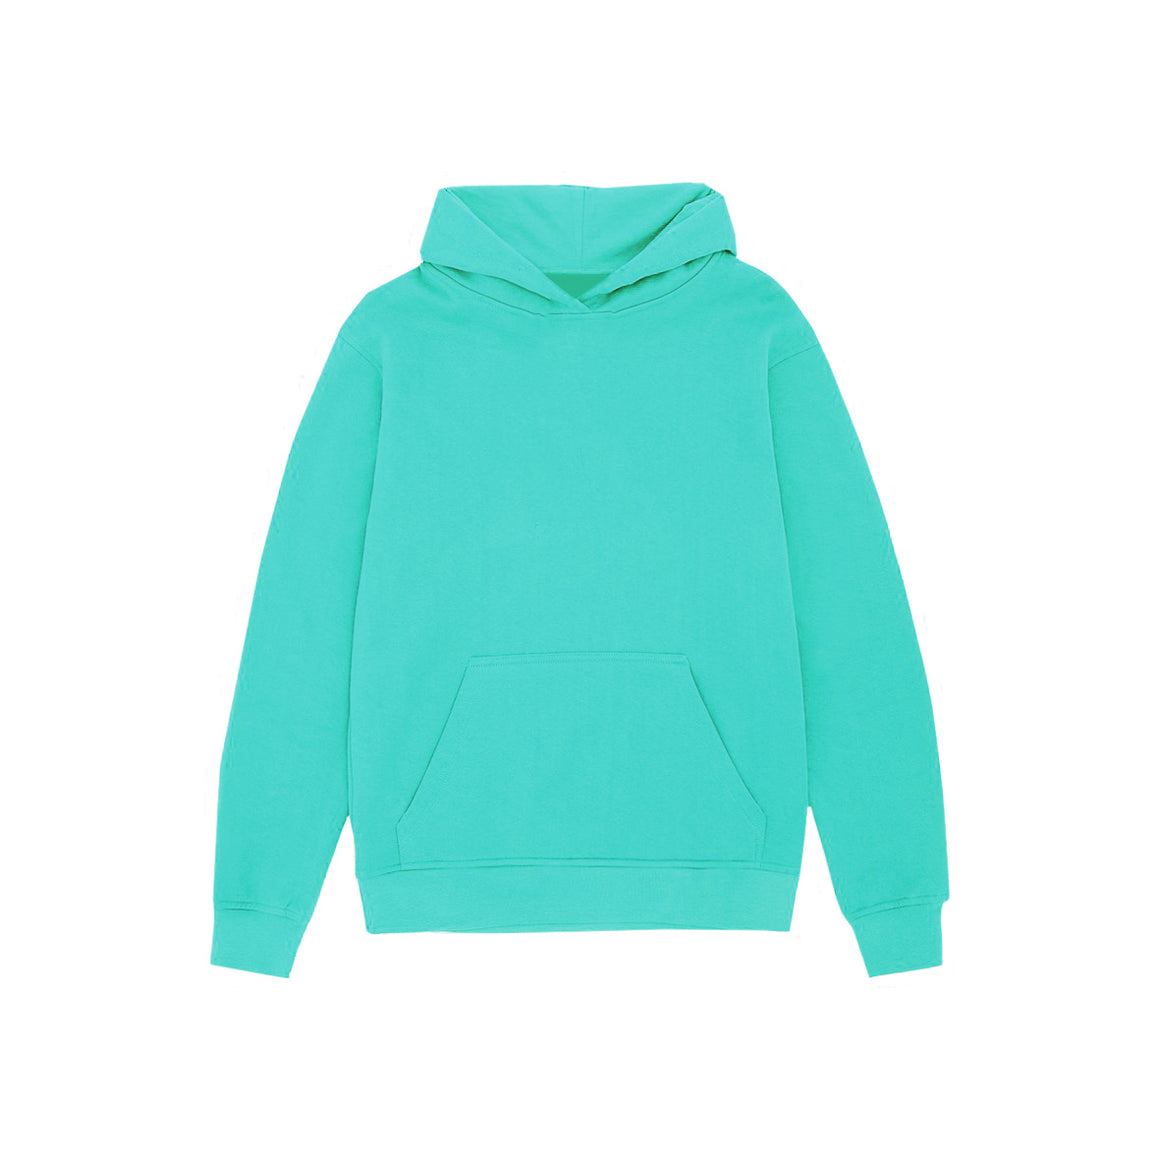 54 FLORAL PREMIUM PULLOVER HOODY - TURQUOISE BLUE